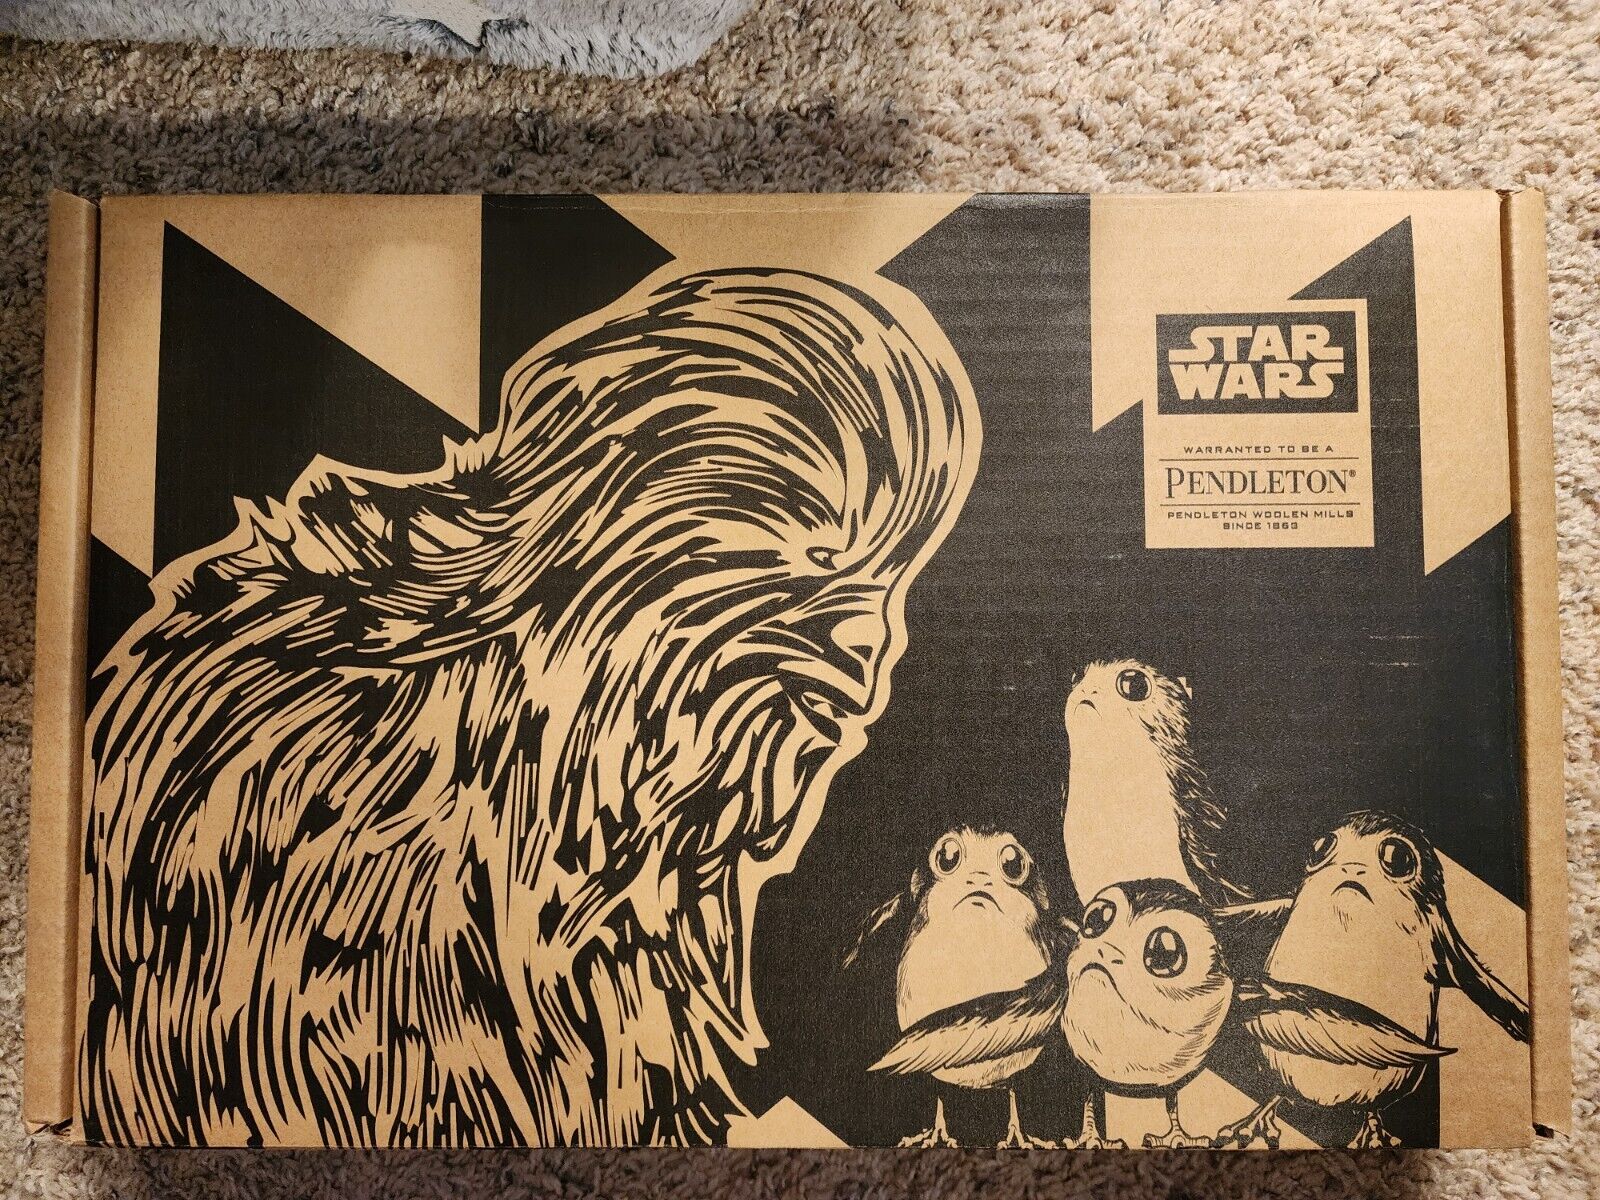 Star wars collection rare wool pendleton blanket chewbacca porgs